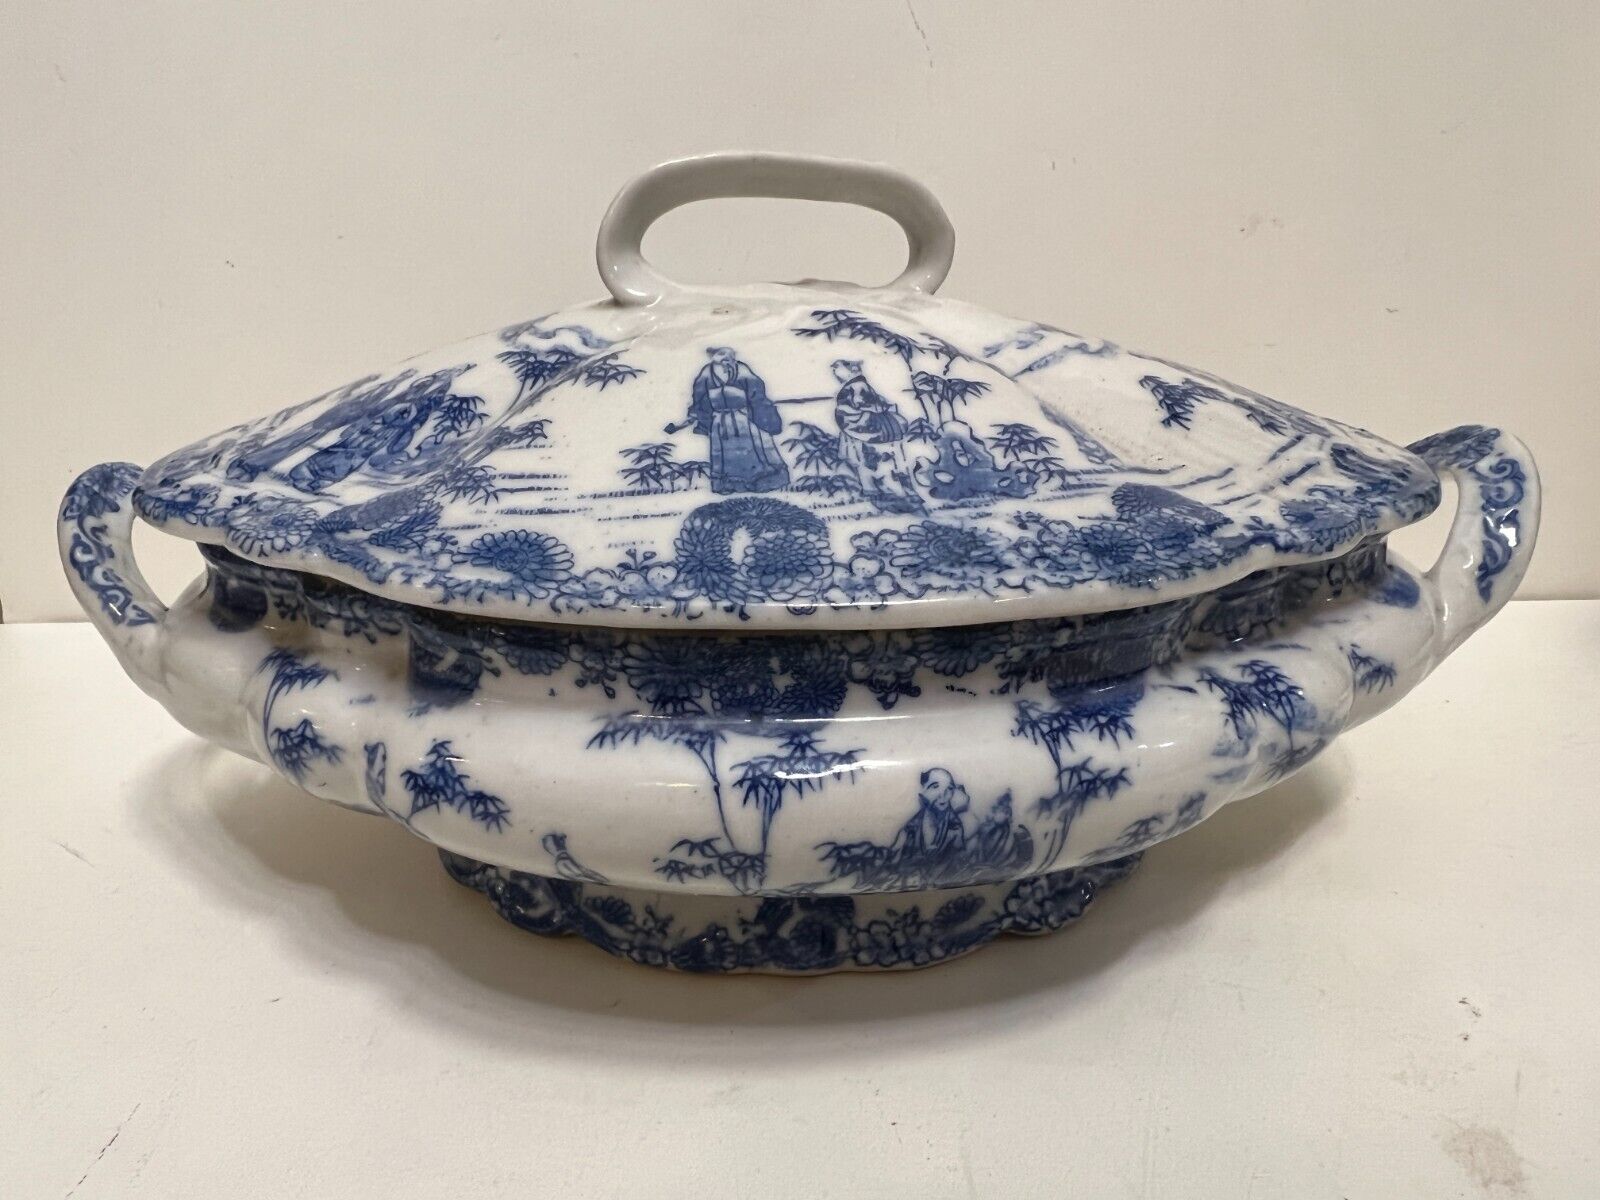 Vintage Chinese Blue & White Covered Oval Vegetable Tureen with Handles